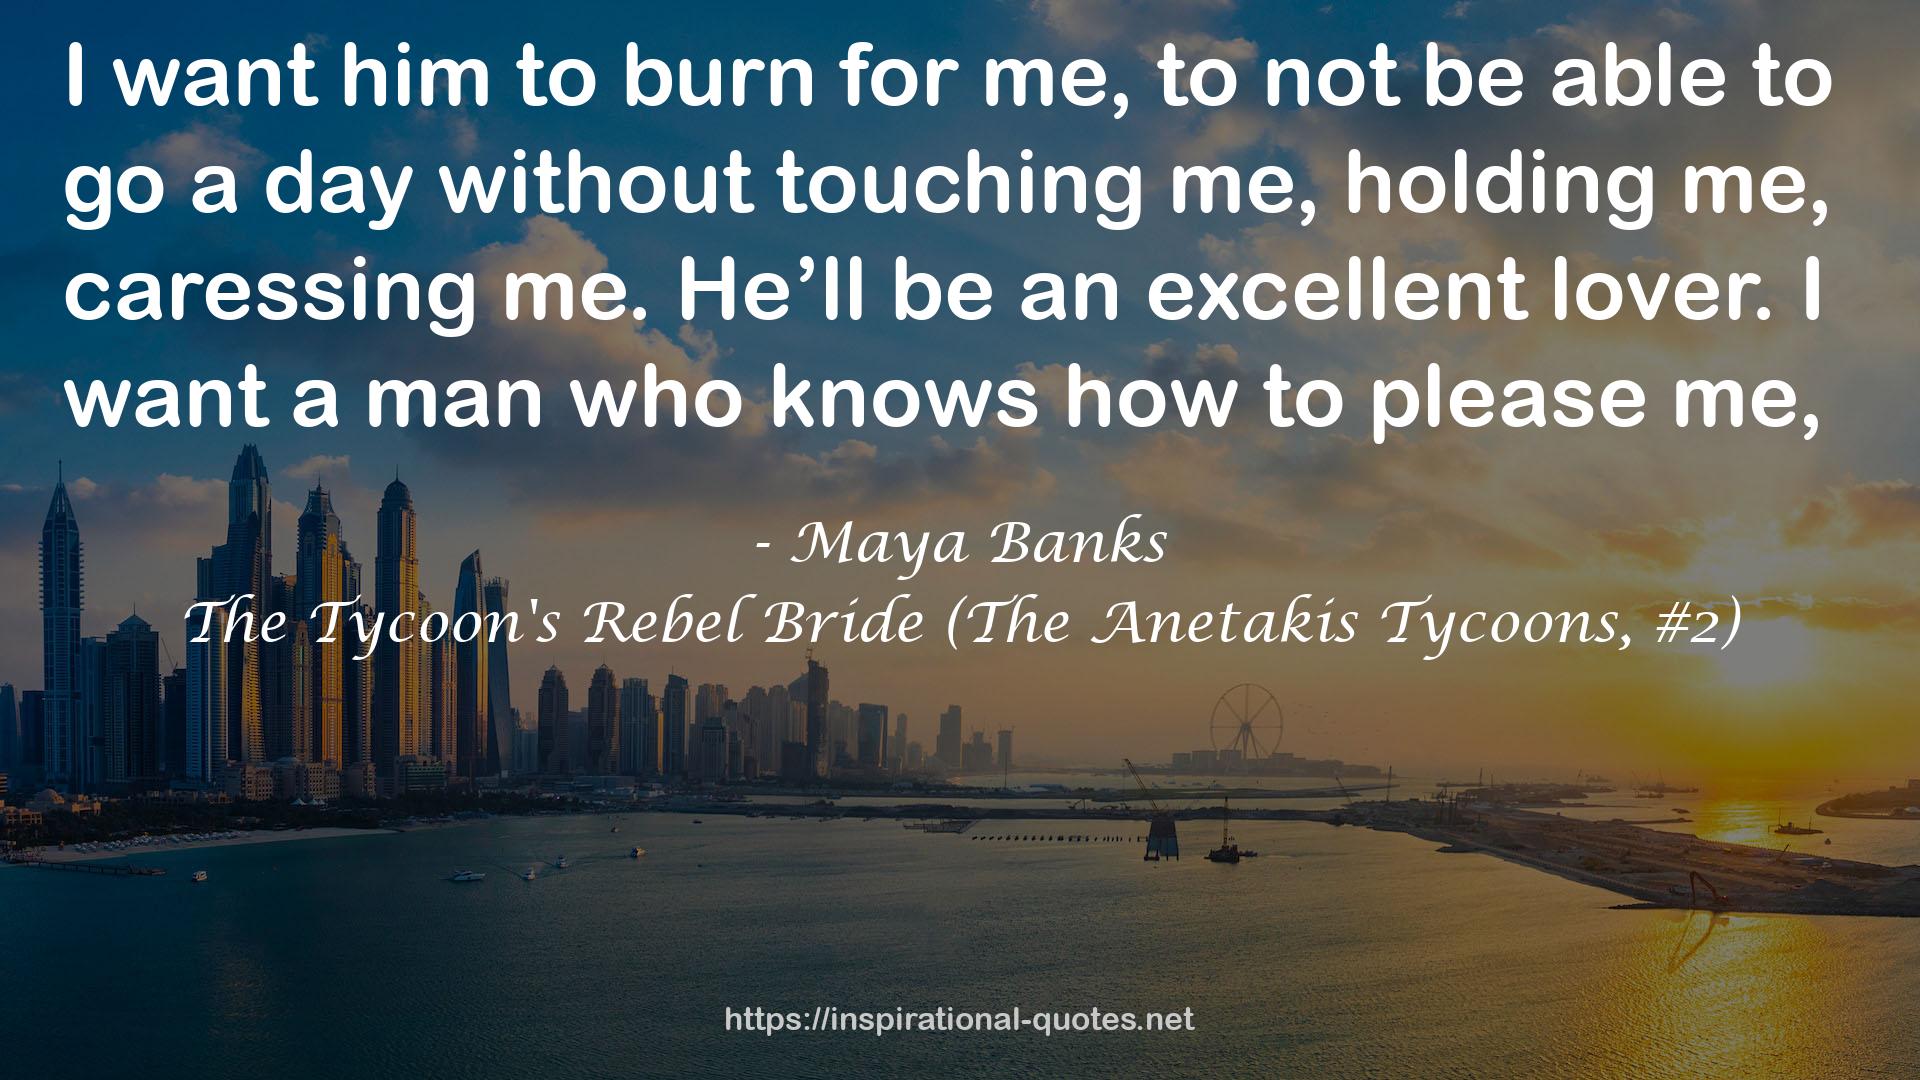 The Tycoon's Rebel Bride (The Anetakis Tycoons, #2) QUOTES